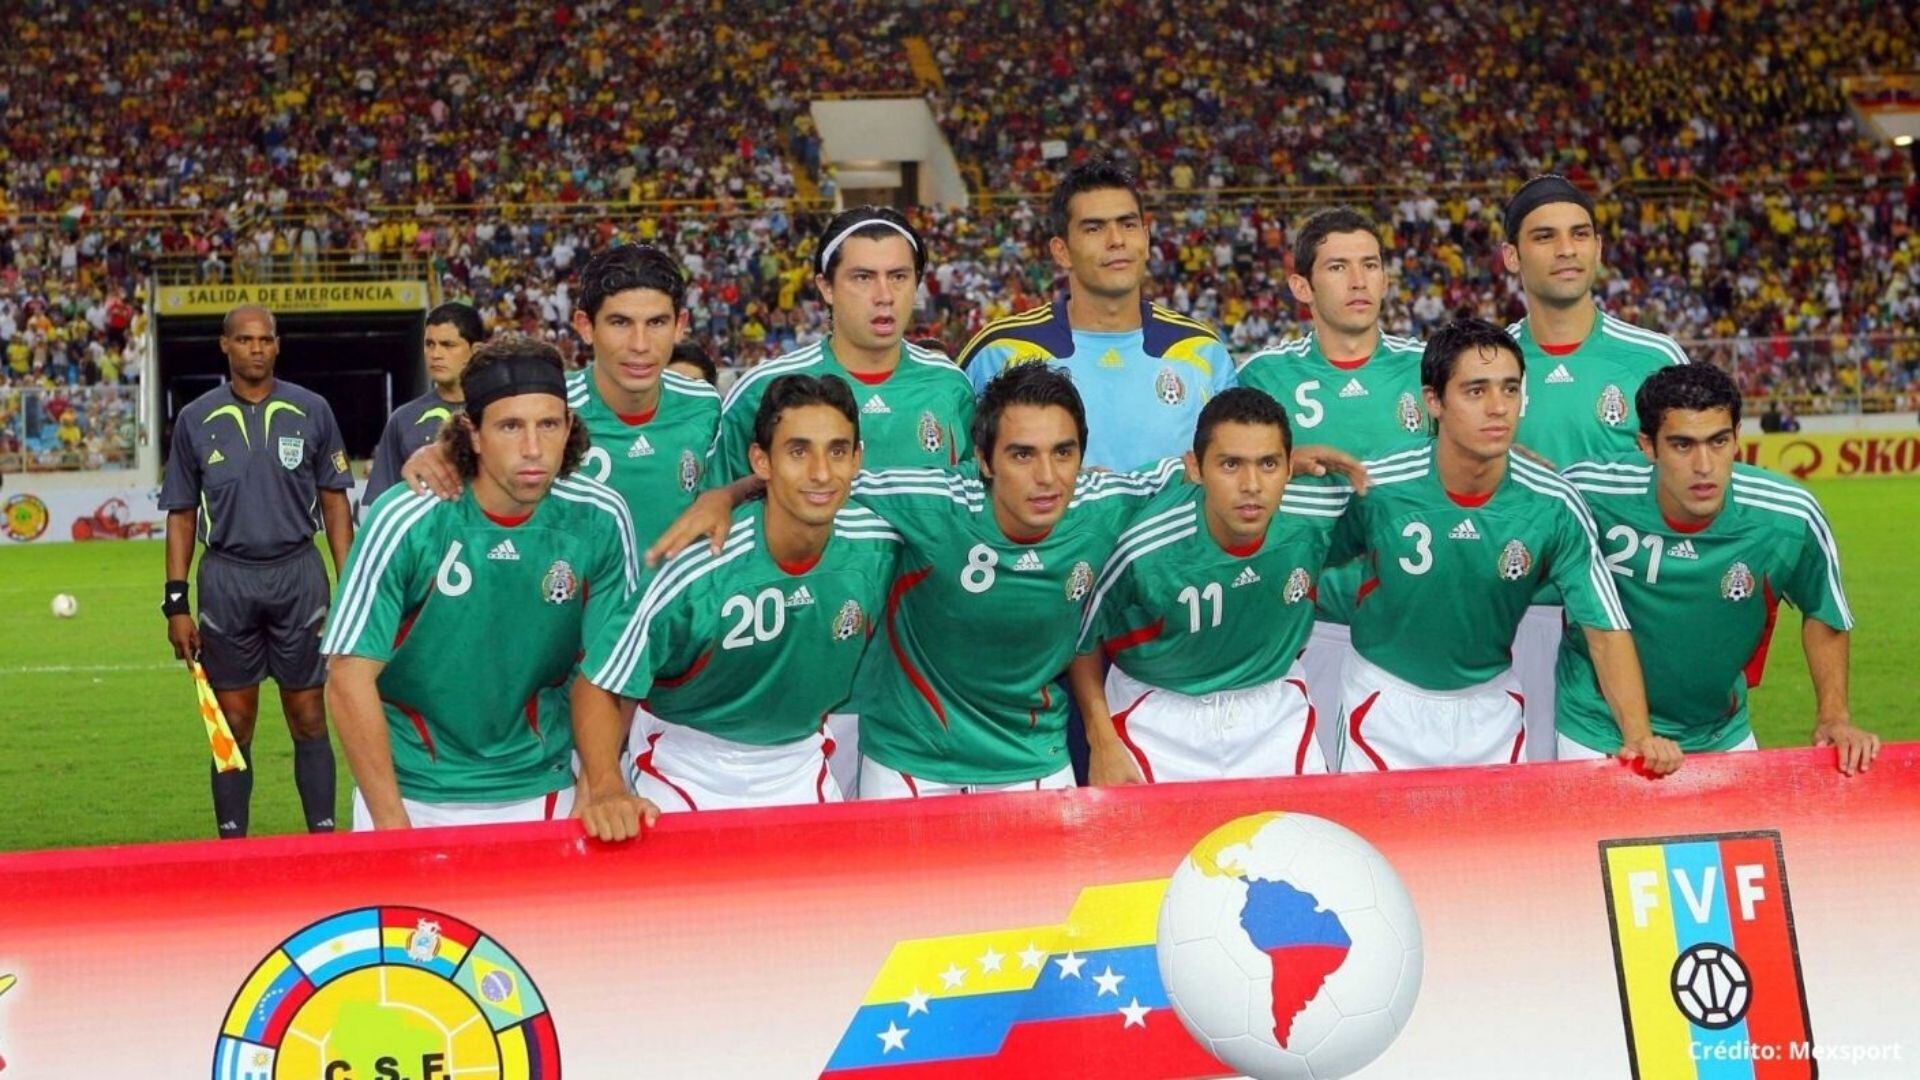 This footballer outplayed Mexico National Team back in the day, but now he’s going to jail